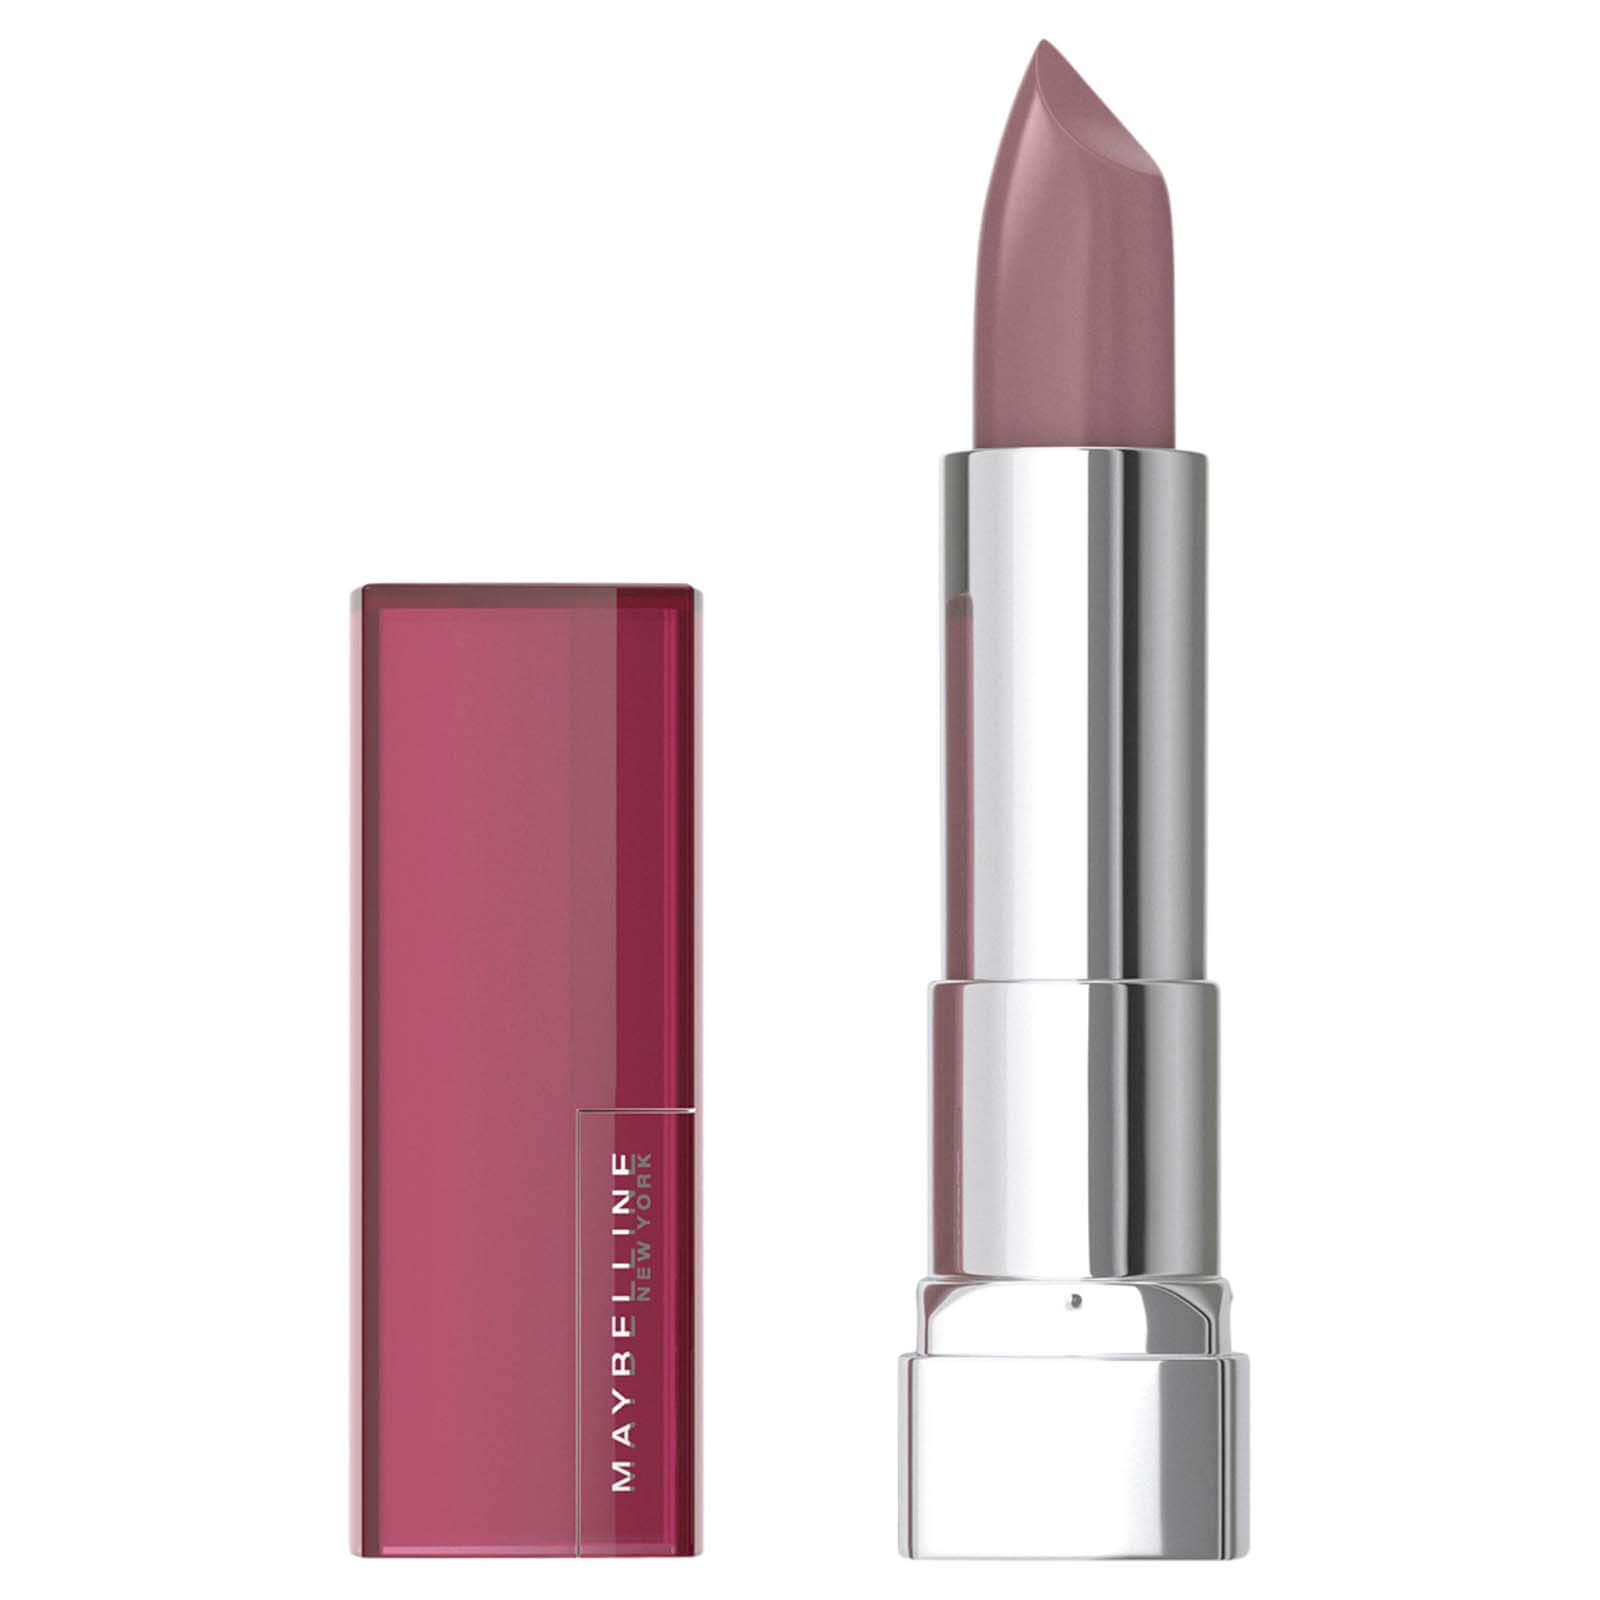 Maybelline Color Sensational The Creams Lipstick 4.2g (Various Shades) - Rose Embrace 200